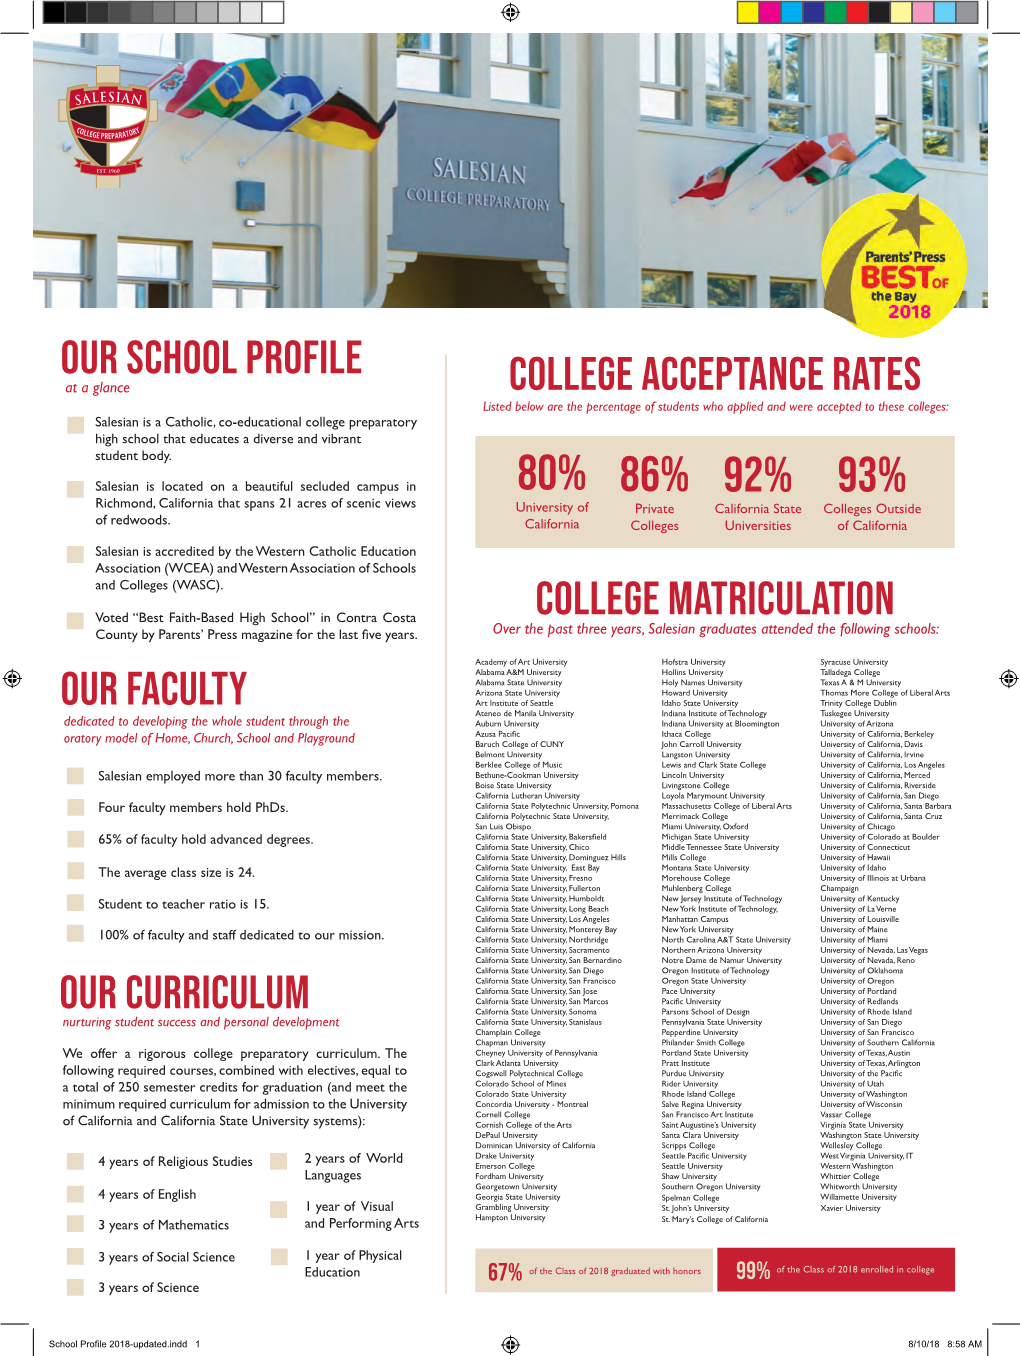 College Acceptance Rates